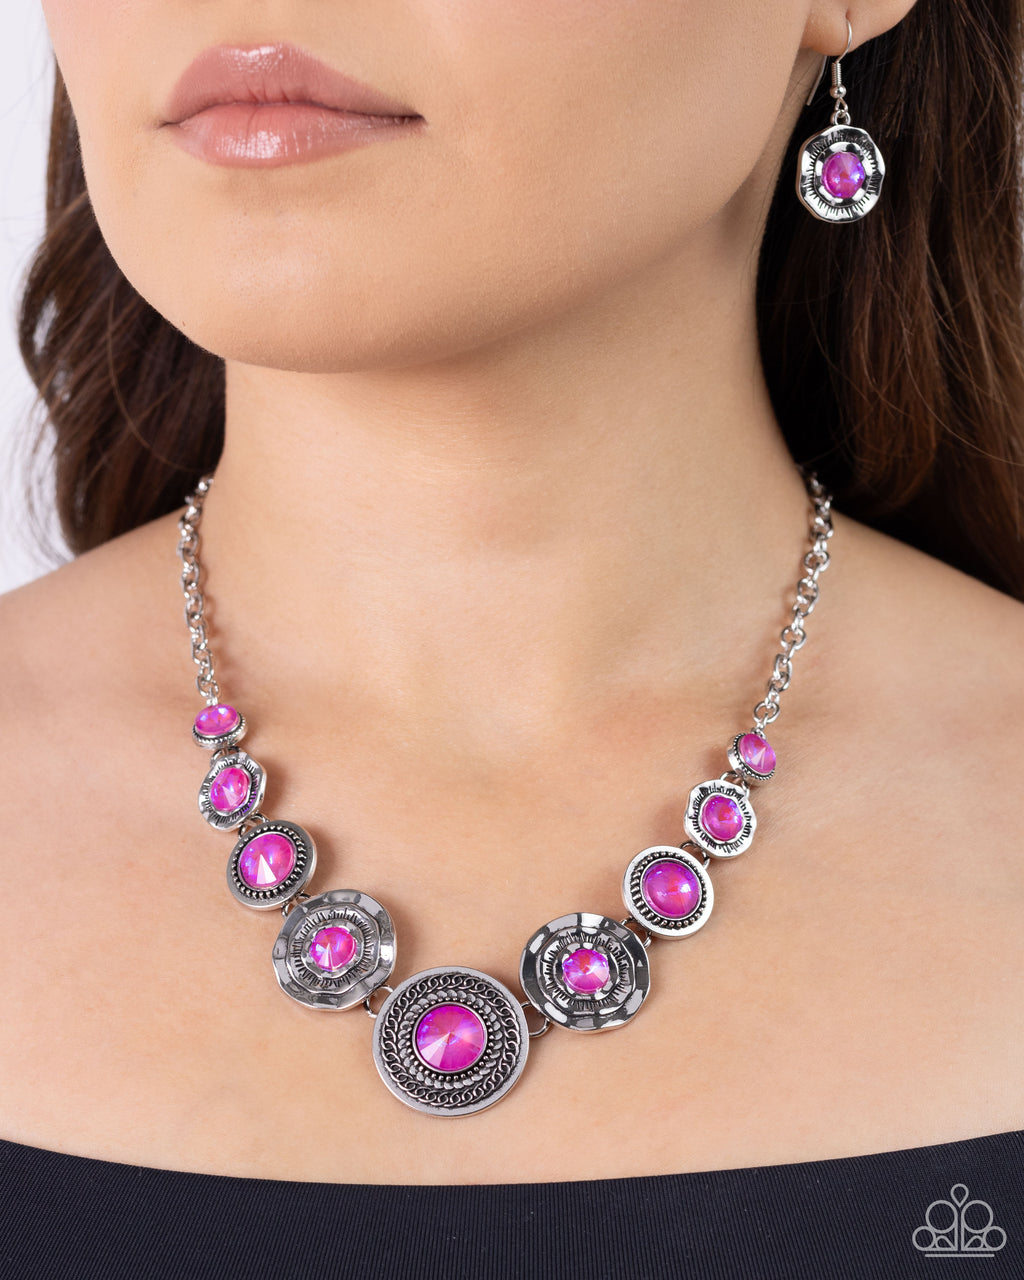 Paparazzi - Treasure Chest Couture - Pink Necklace